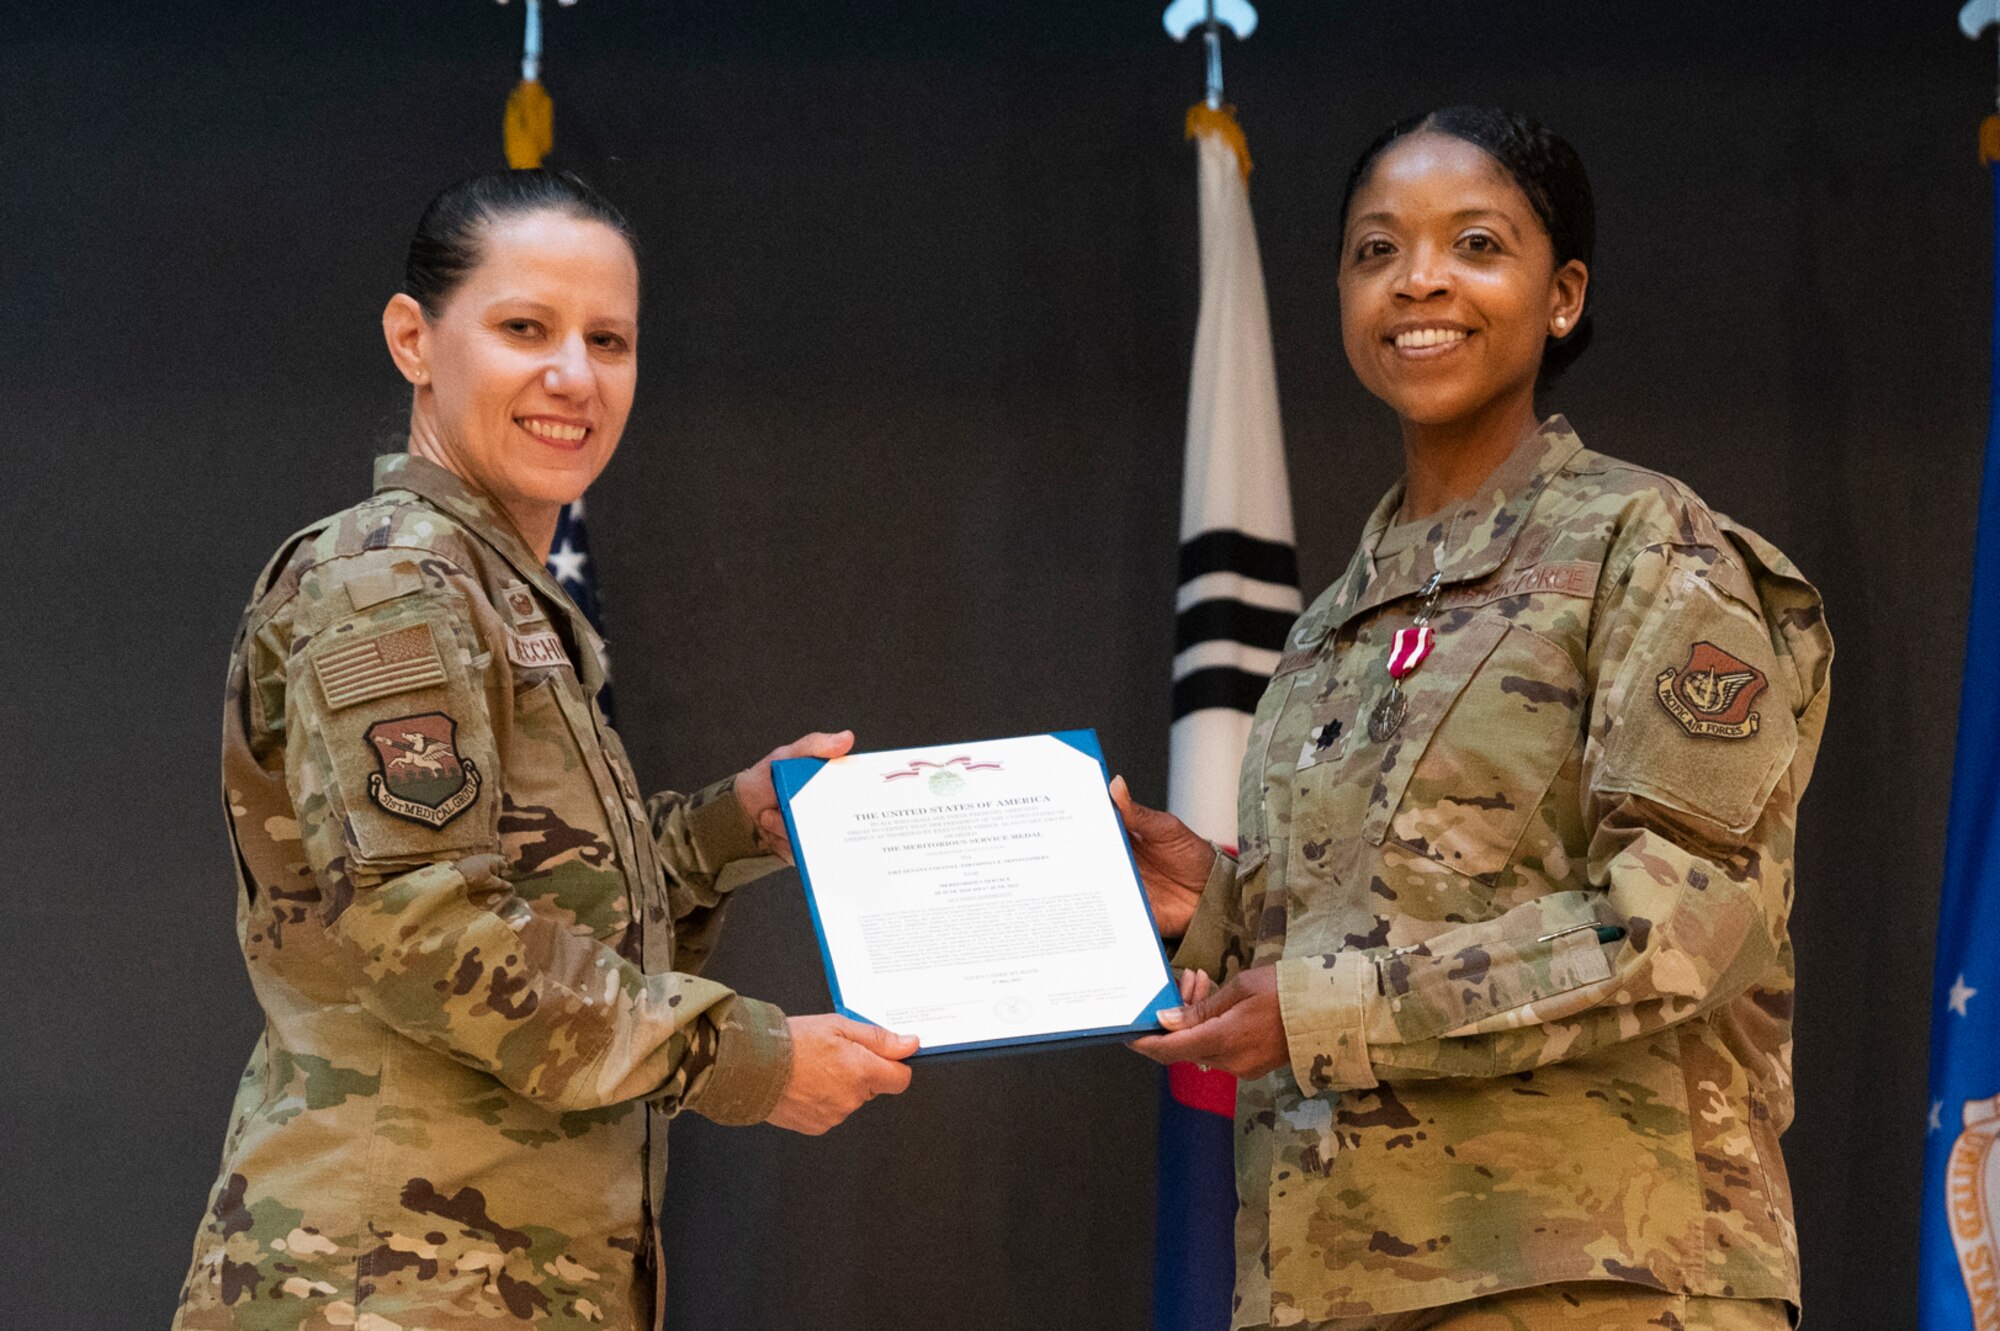 Col. Jennifer Vecchione, left, 51st Medical Group commander, presents Lt. Col. Theodosia Montgomery, 51st Medical Support Squadron (MDSS) outgoing commander, a Meritorious Service Medal (MSM) medal